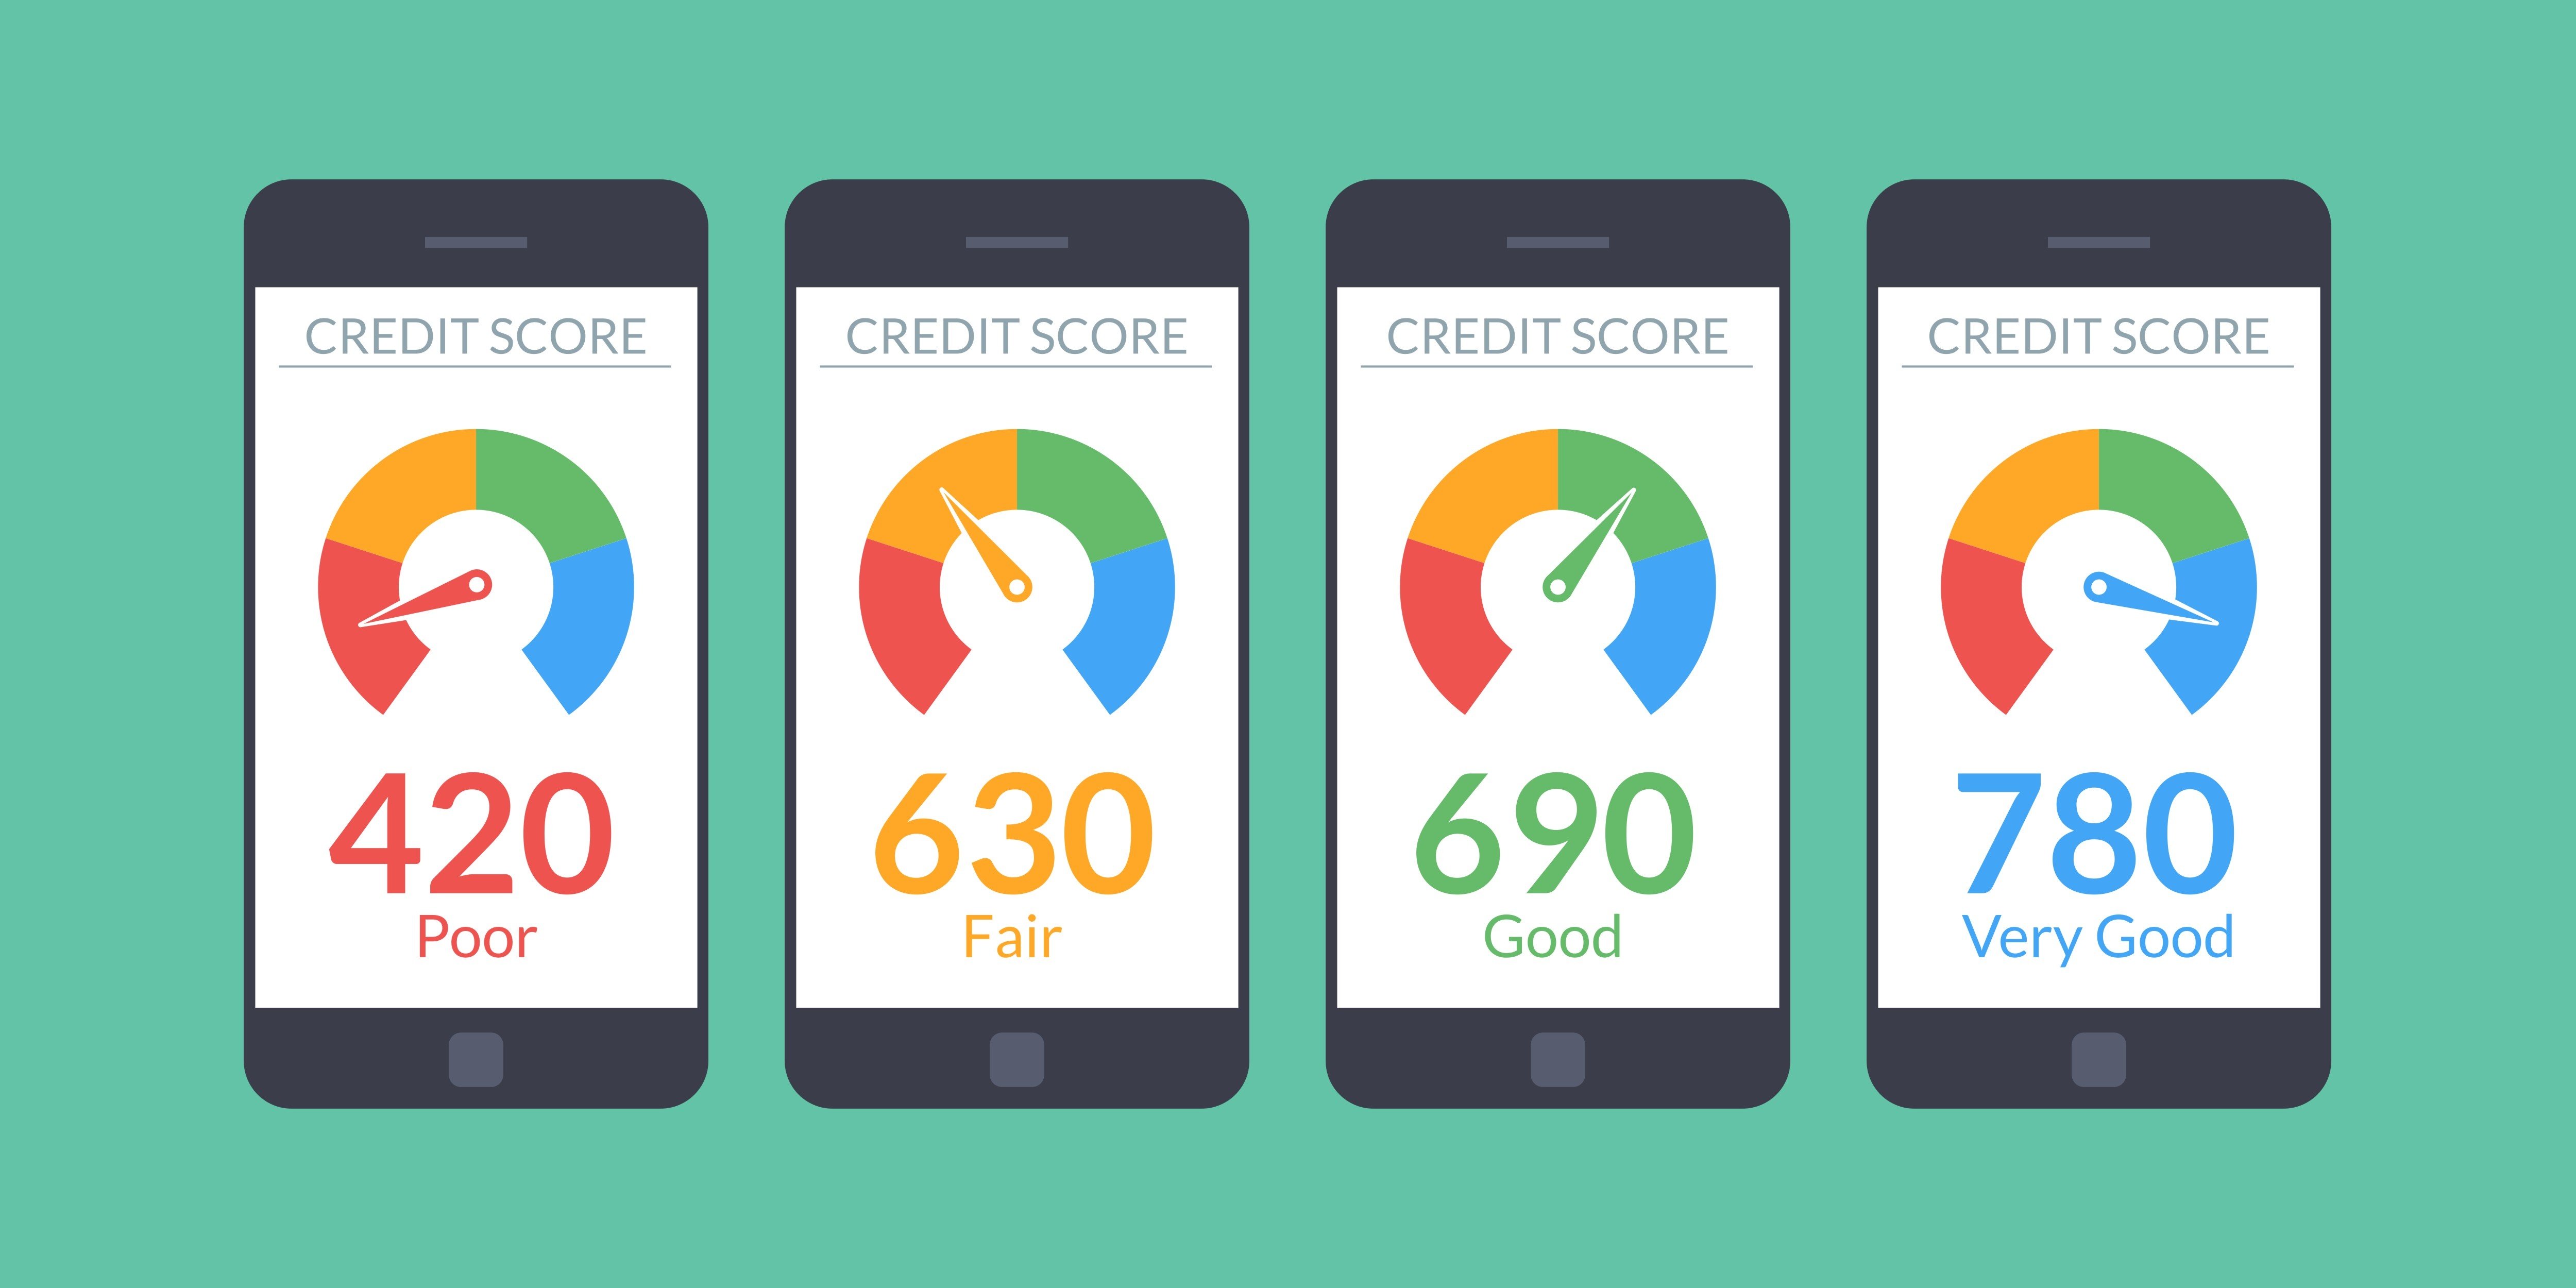 What Credit Score Do I Need To Buy A Home?